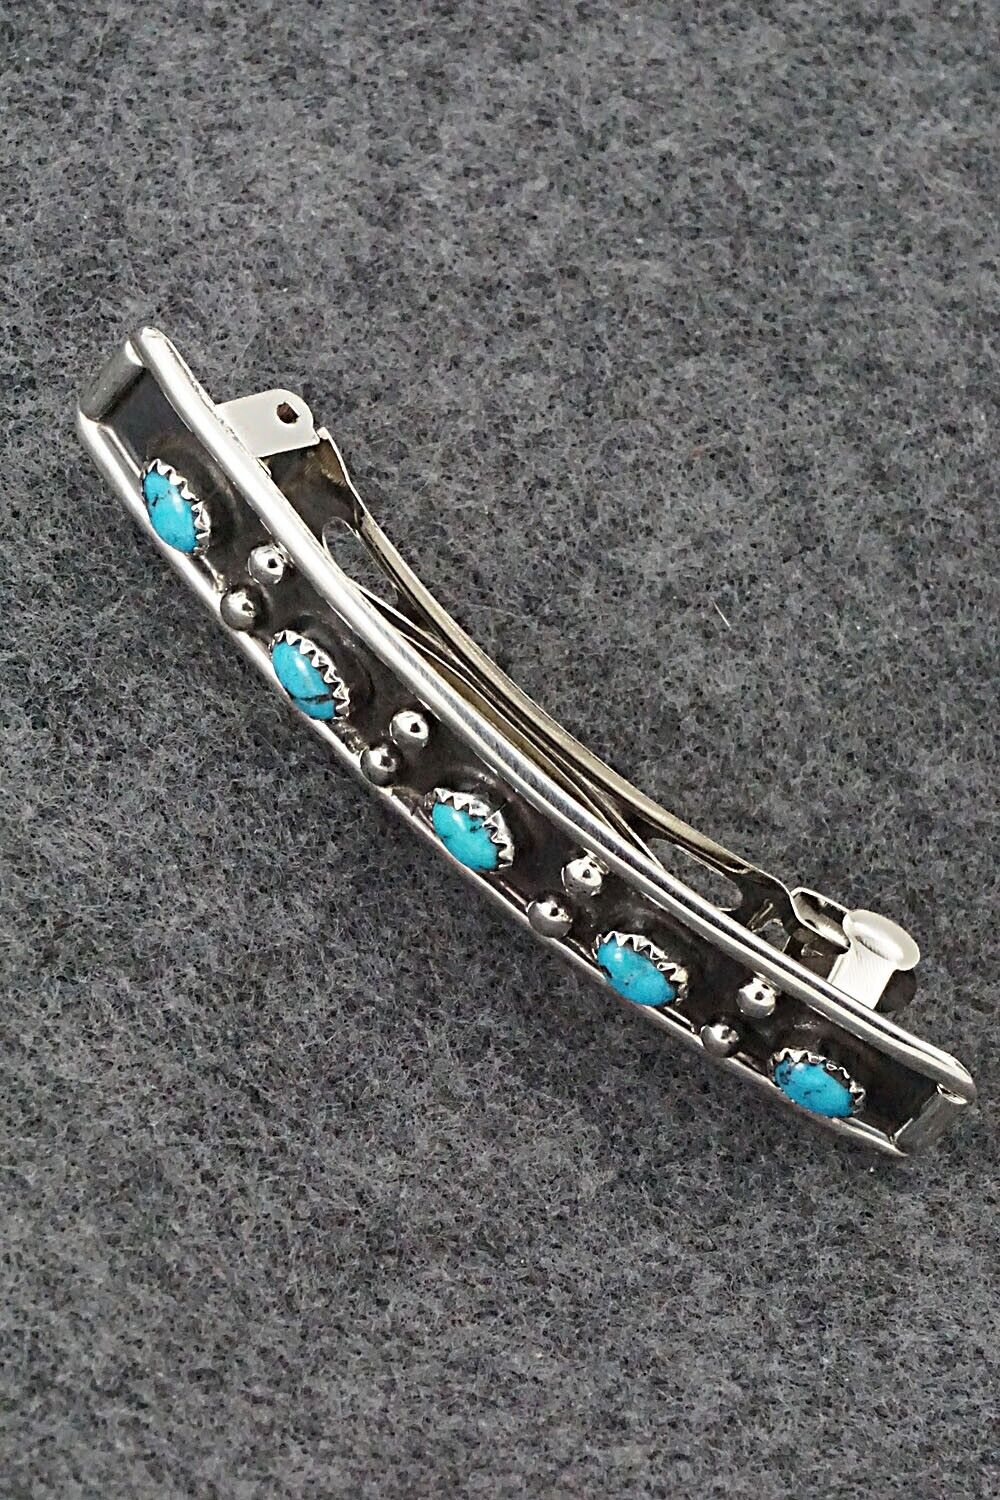 Turquoise & Sterling Silver Hair Barrette - Paul Largo